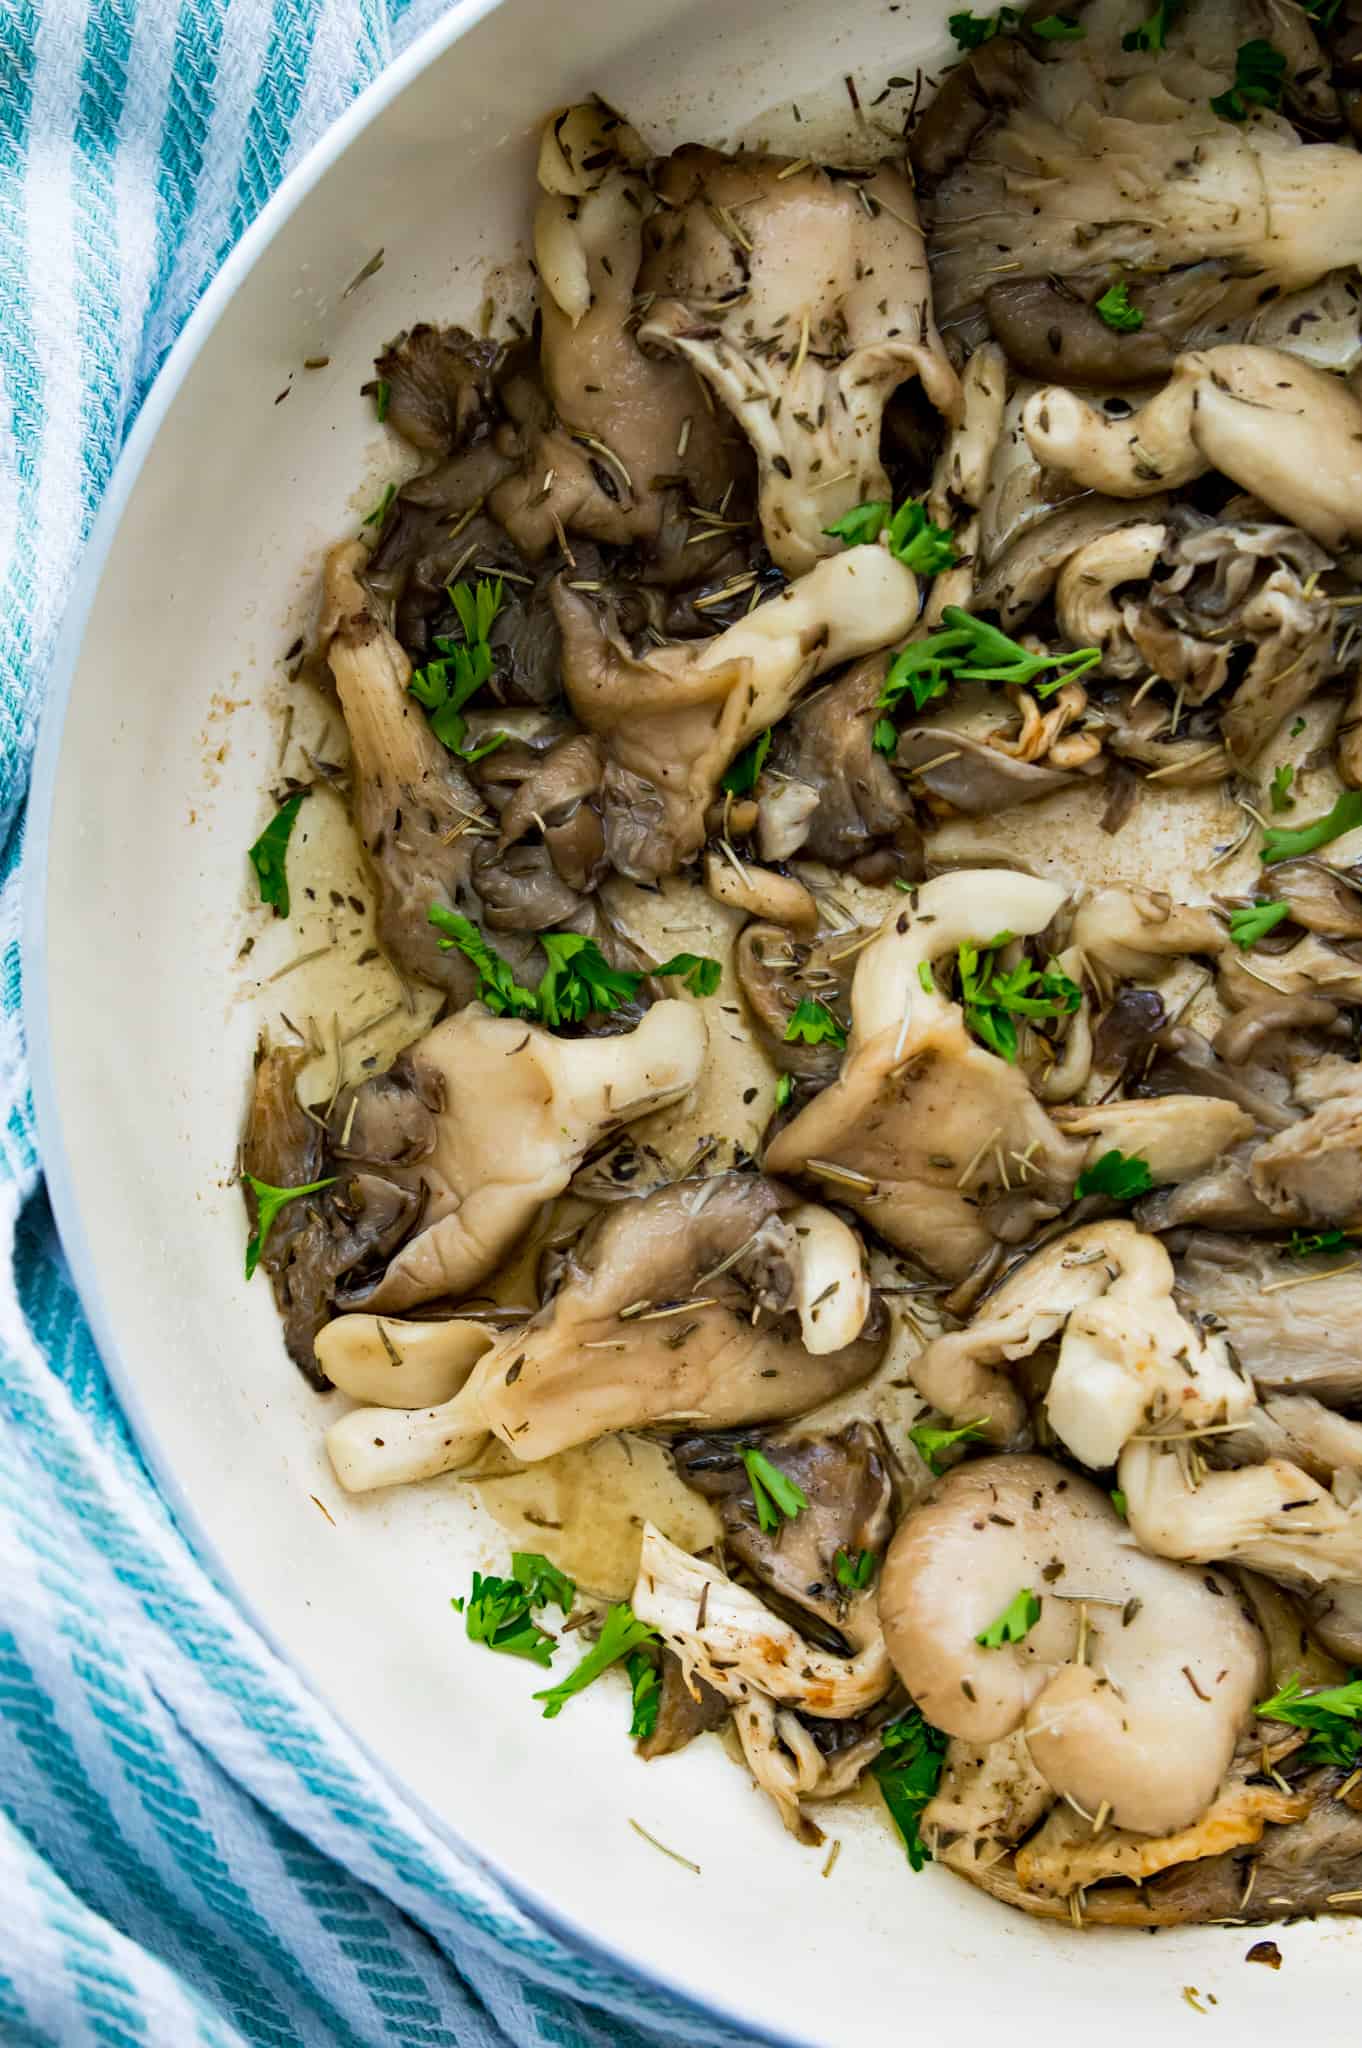 A pan full of cooked oyster mushrooms topped with fresh herbs